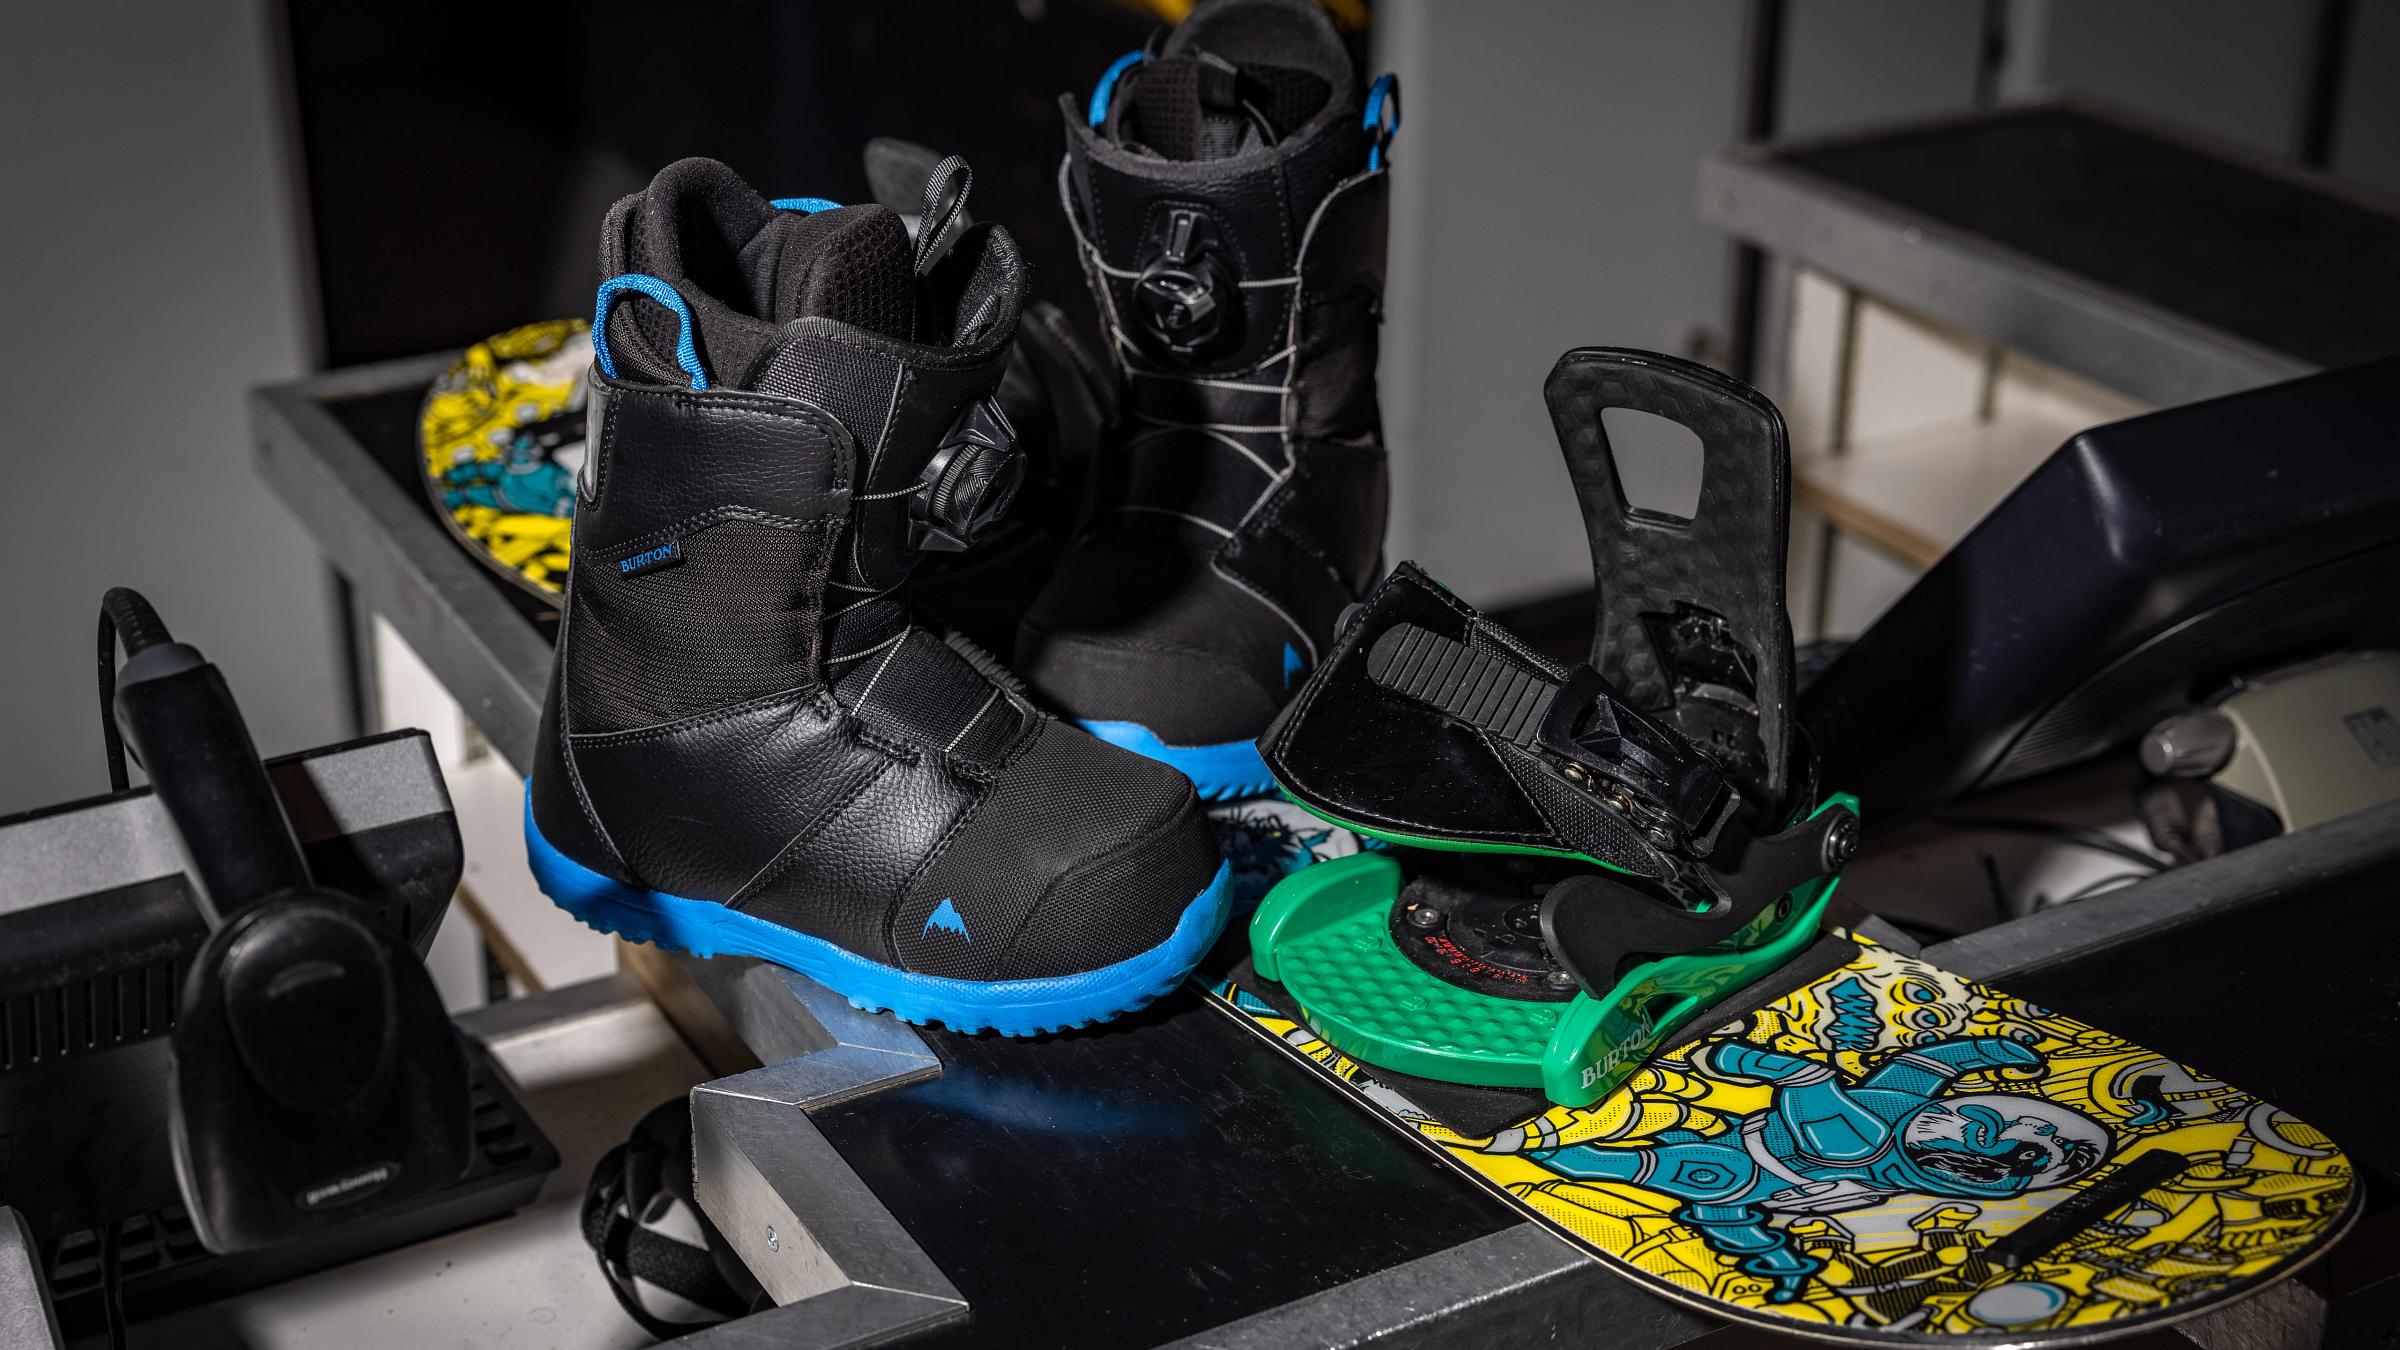 Snowboard boots and board